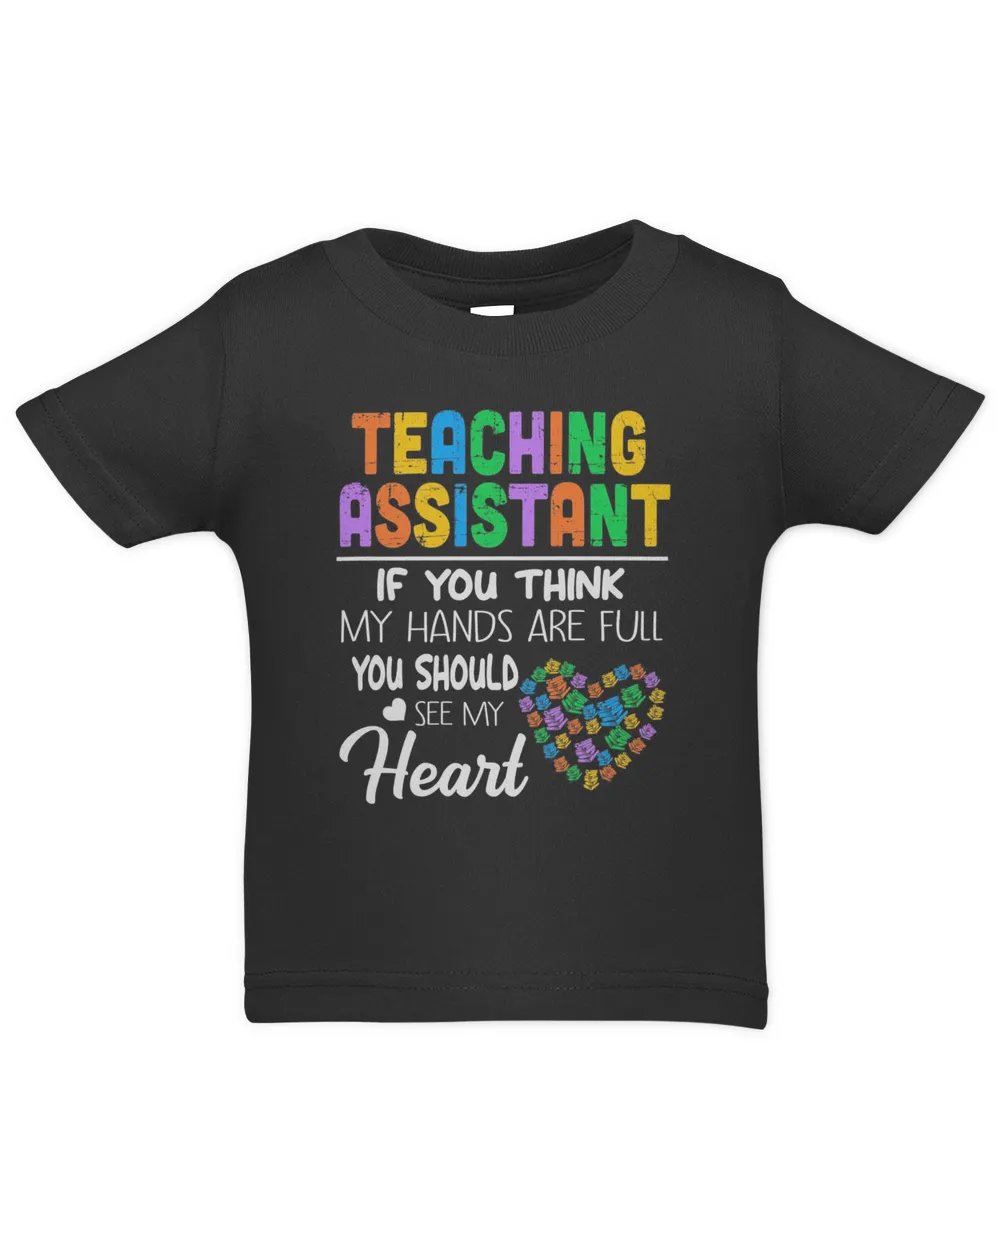 Teaching Assistant If You Think My Hands Are Full You Should See My Heart Shirt